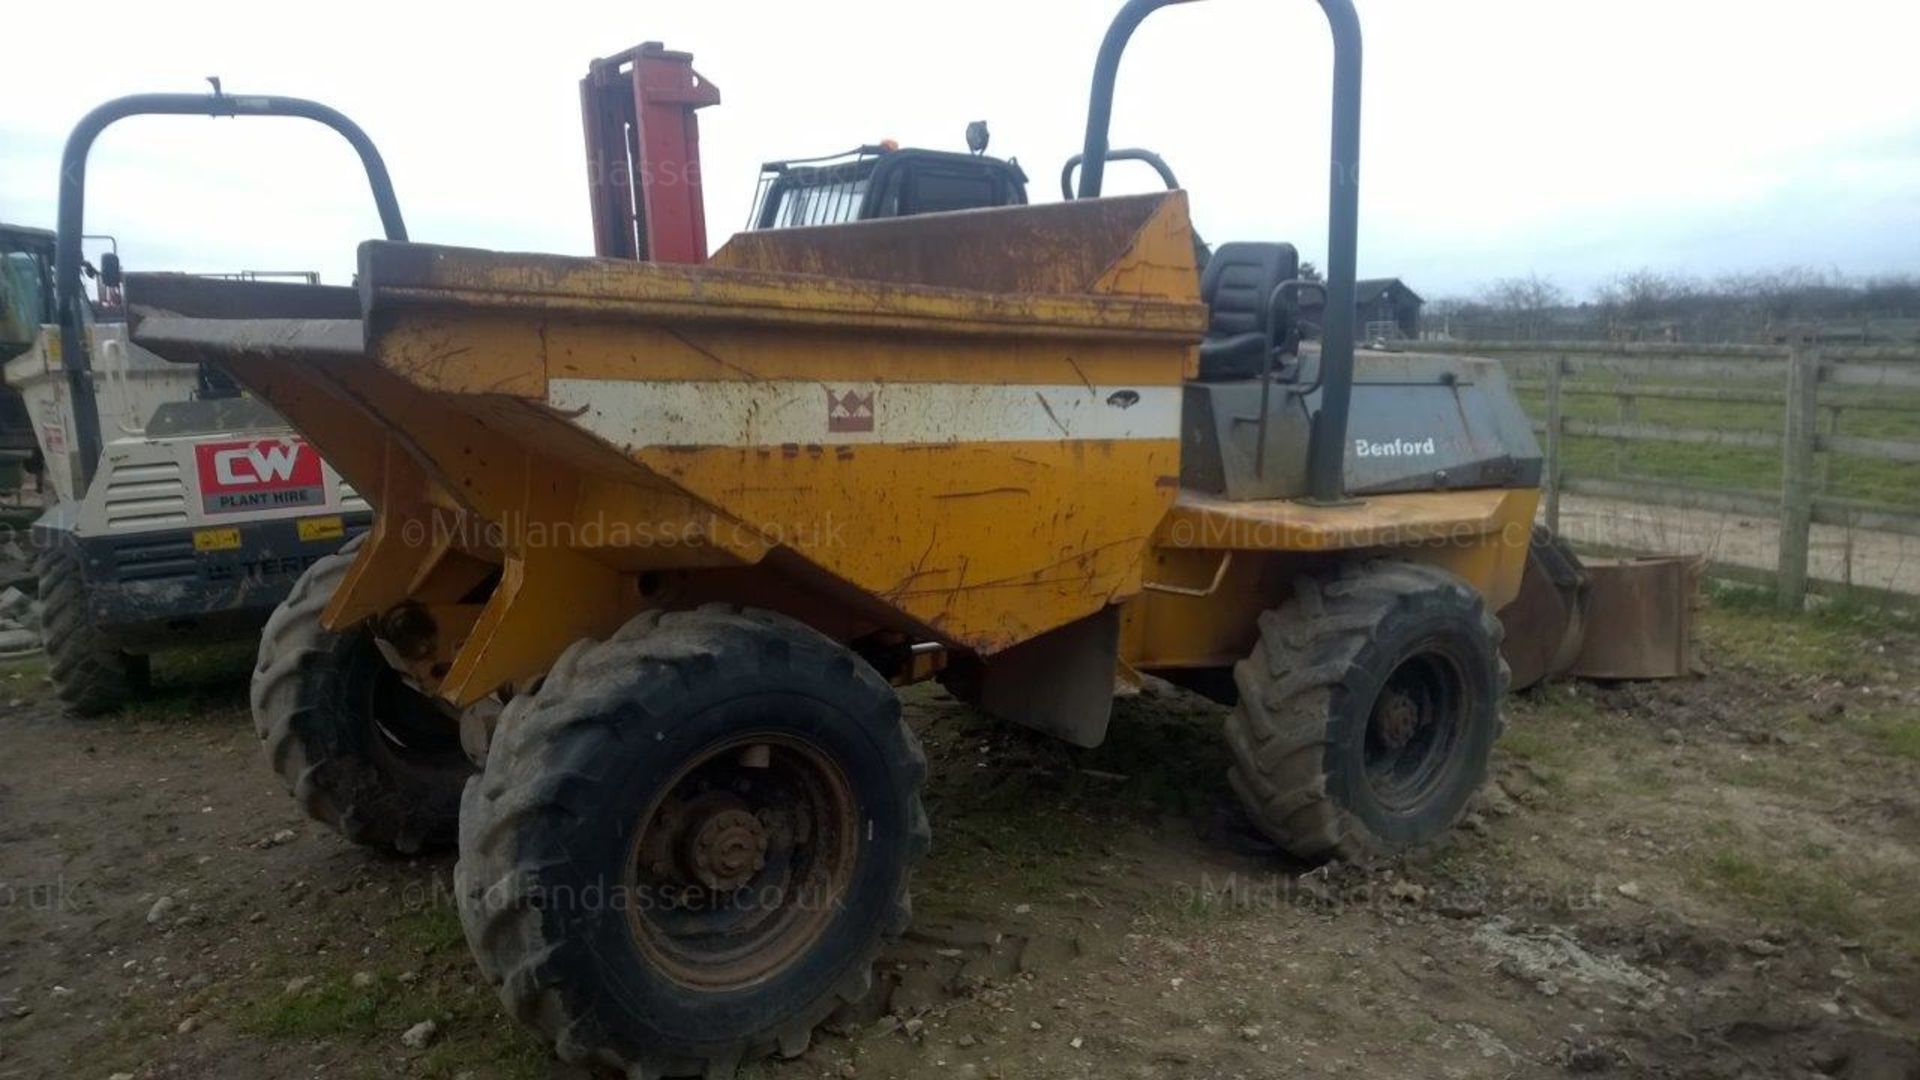 DS - BENFORD PT6000 6 TONNE DUMPER   4x4   COLLECTION FROM CHESTERFIELD - Image 6 of 6